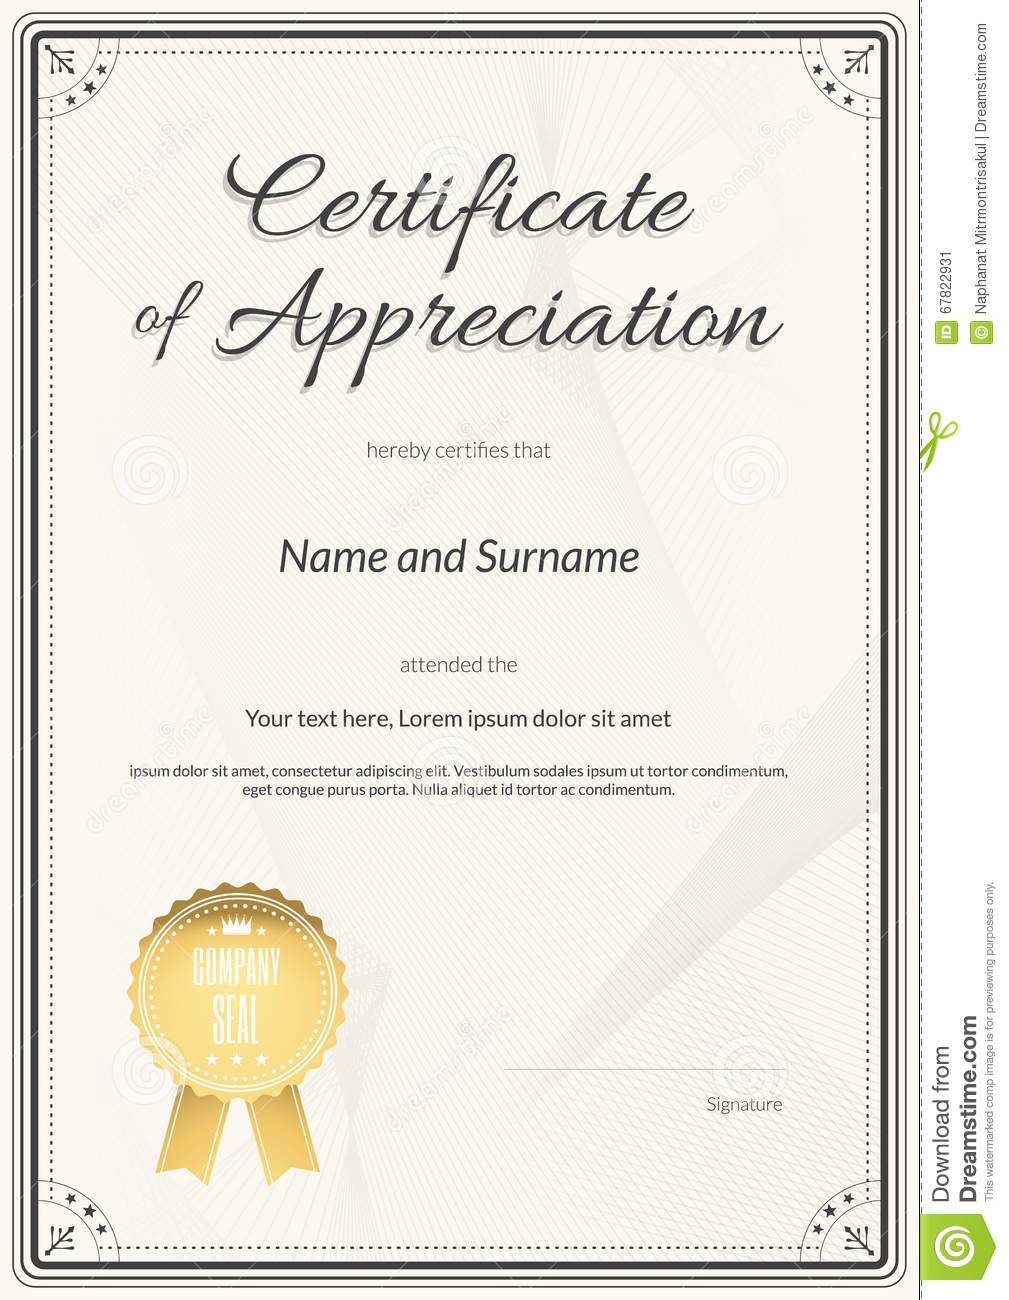 Certificate Of Appreciation Template In Vector Stock Vector  Pertaining To Certificate Of Appreciation Template Free Printable